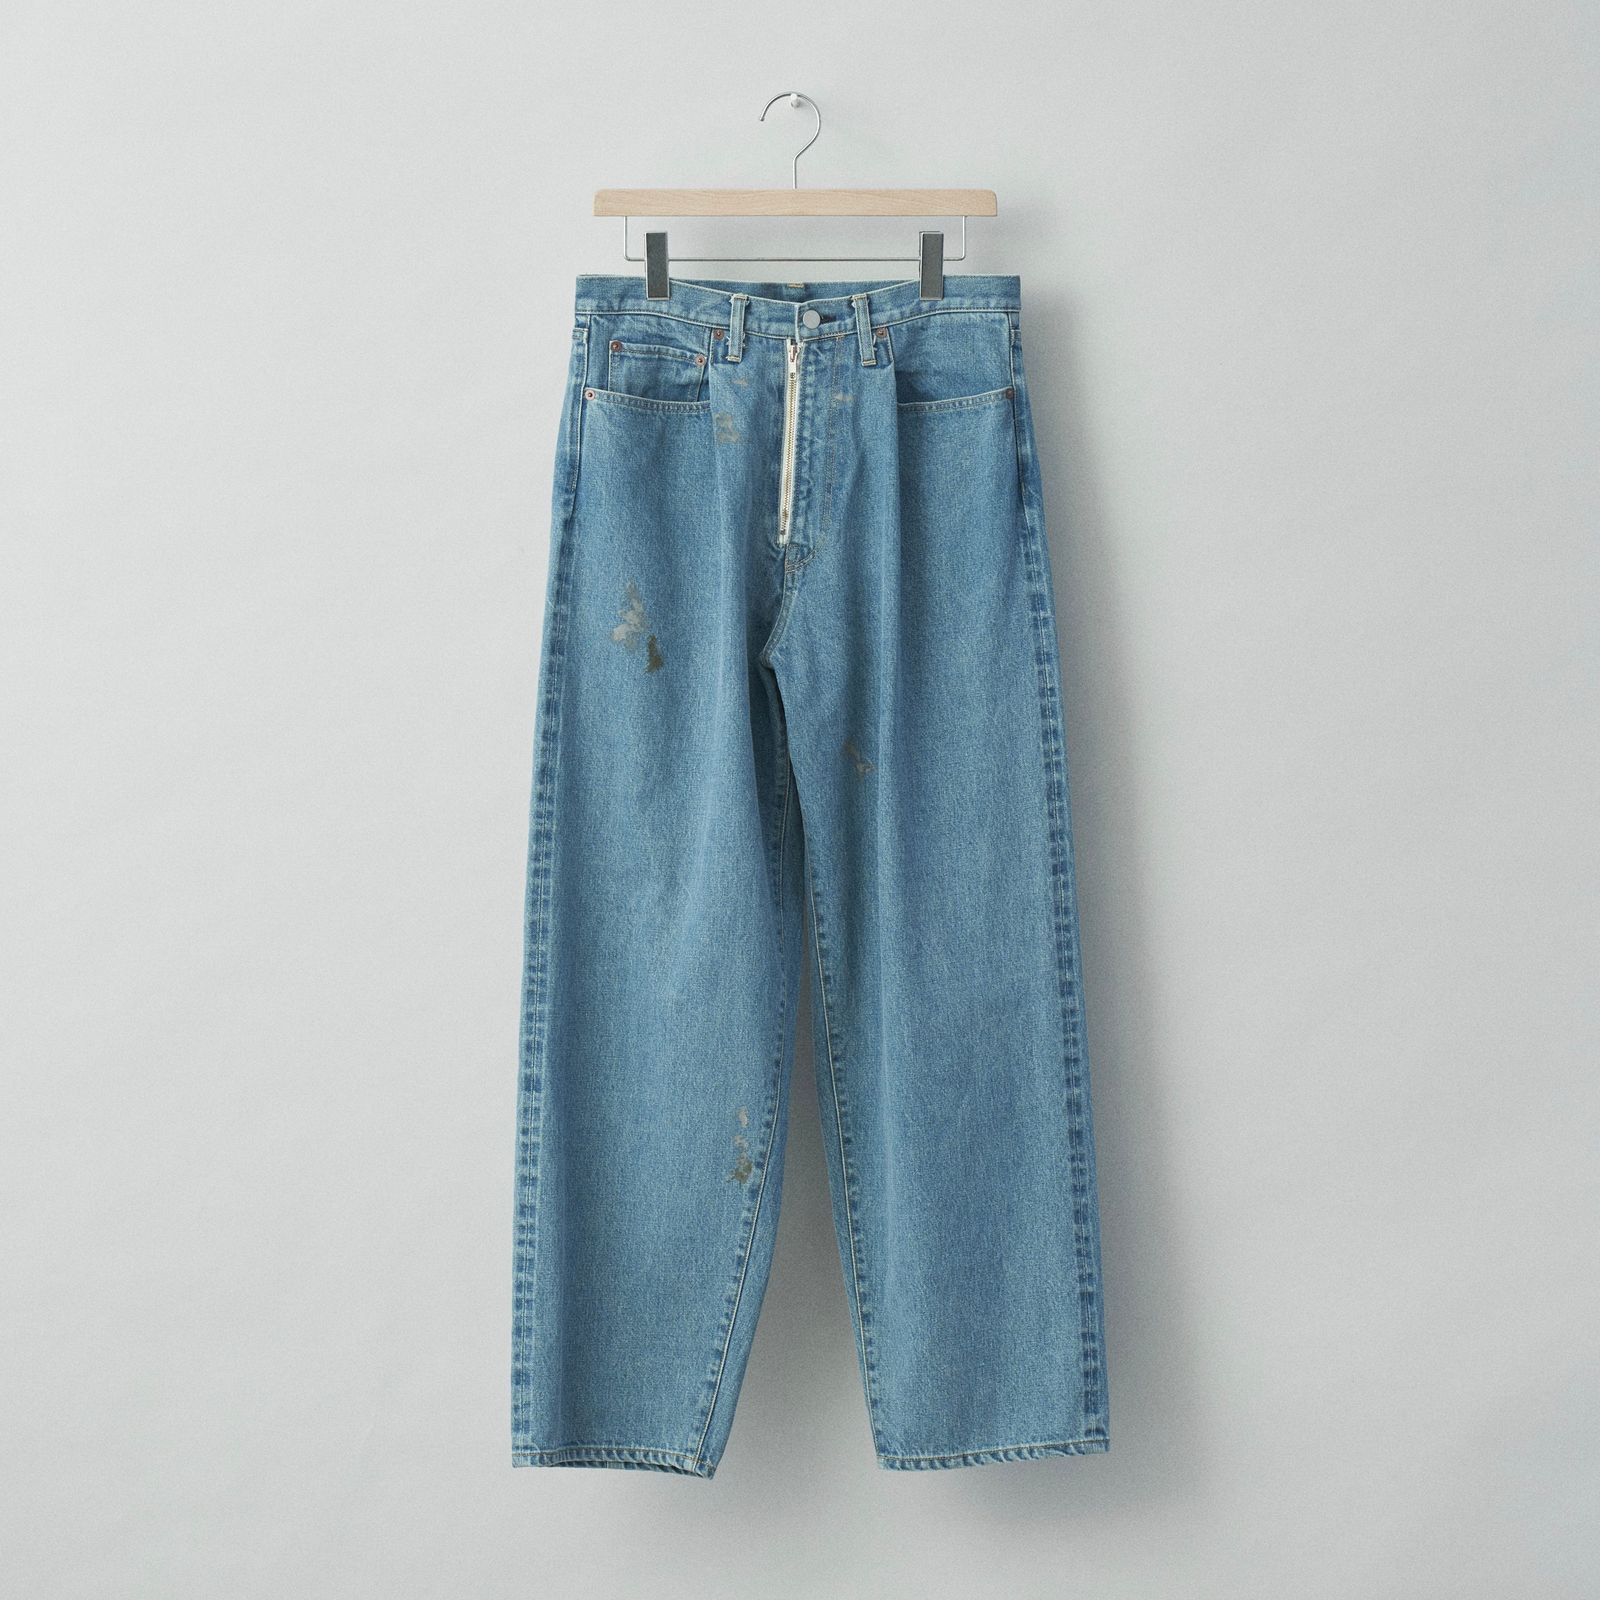 stein - 【残りわずか】5pk Vintage Reproduction Wide Denim Jeans